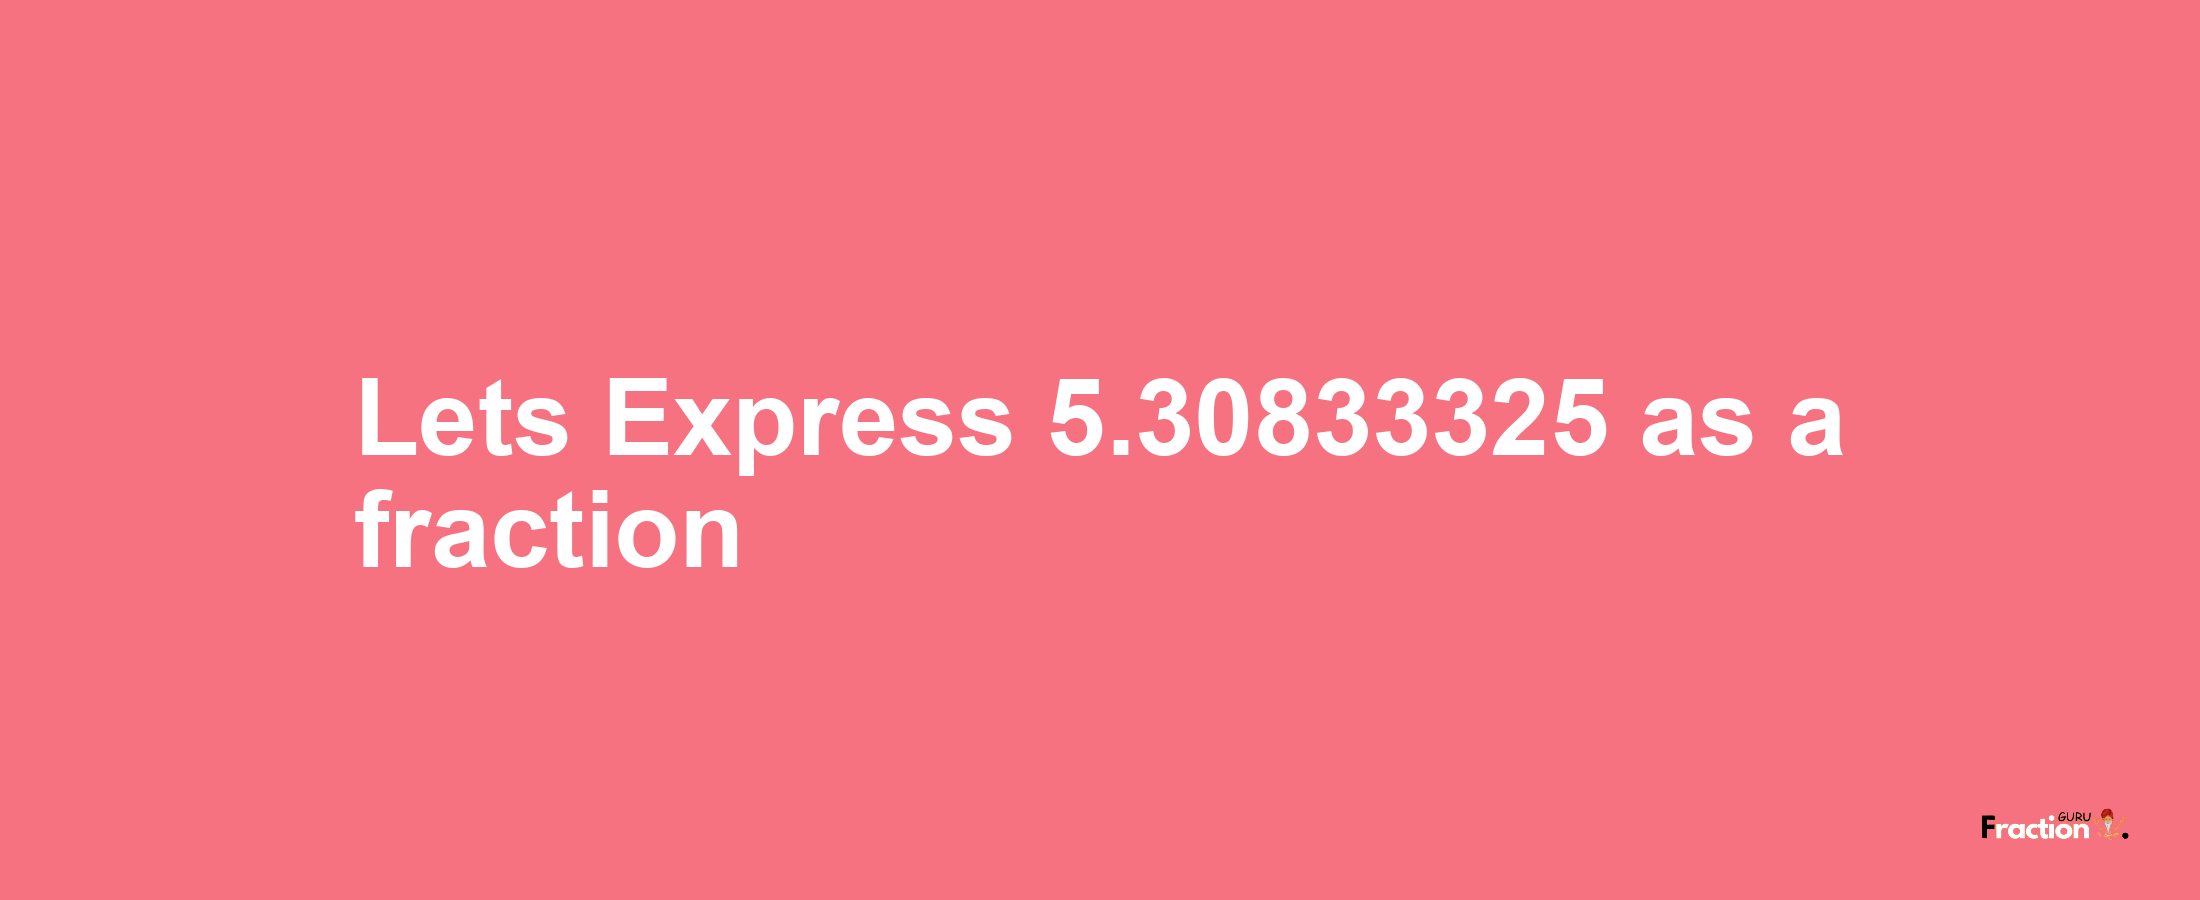 Lets Express 5.30833325 as afraction